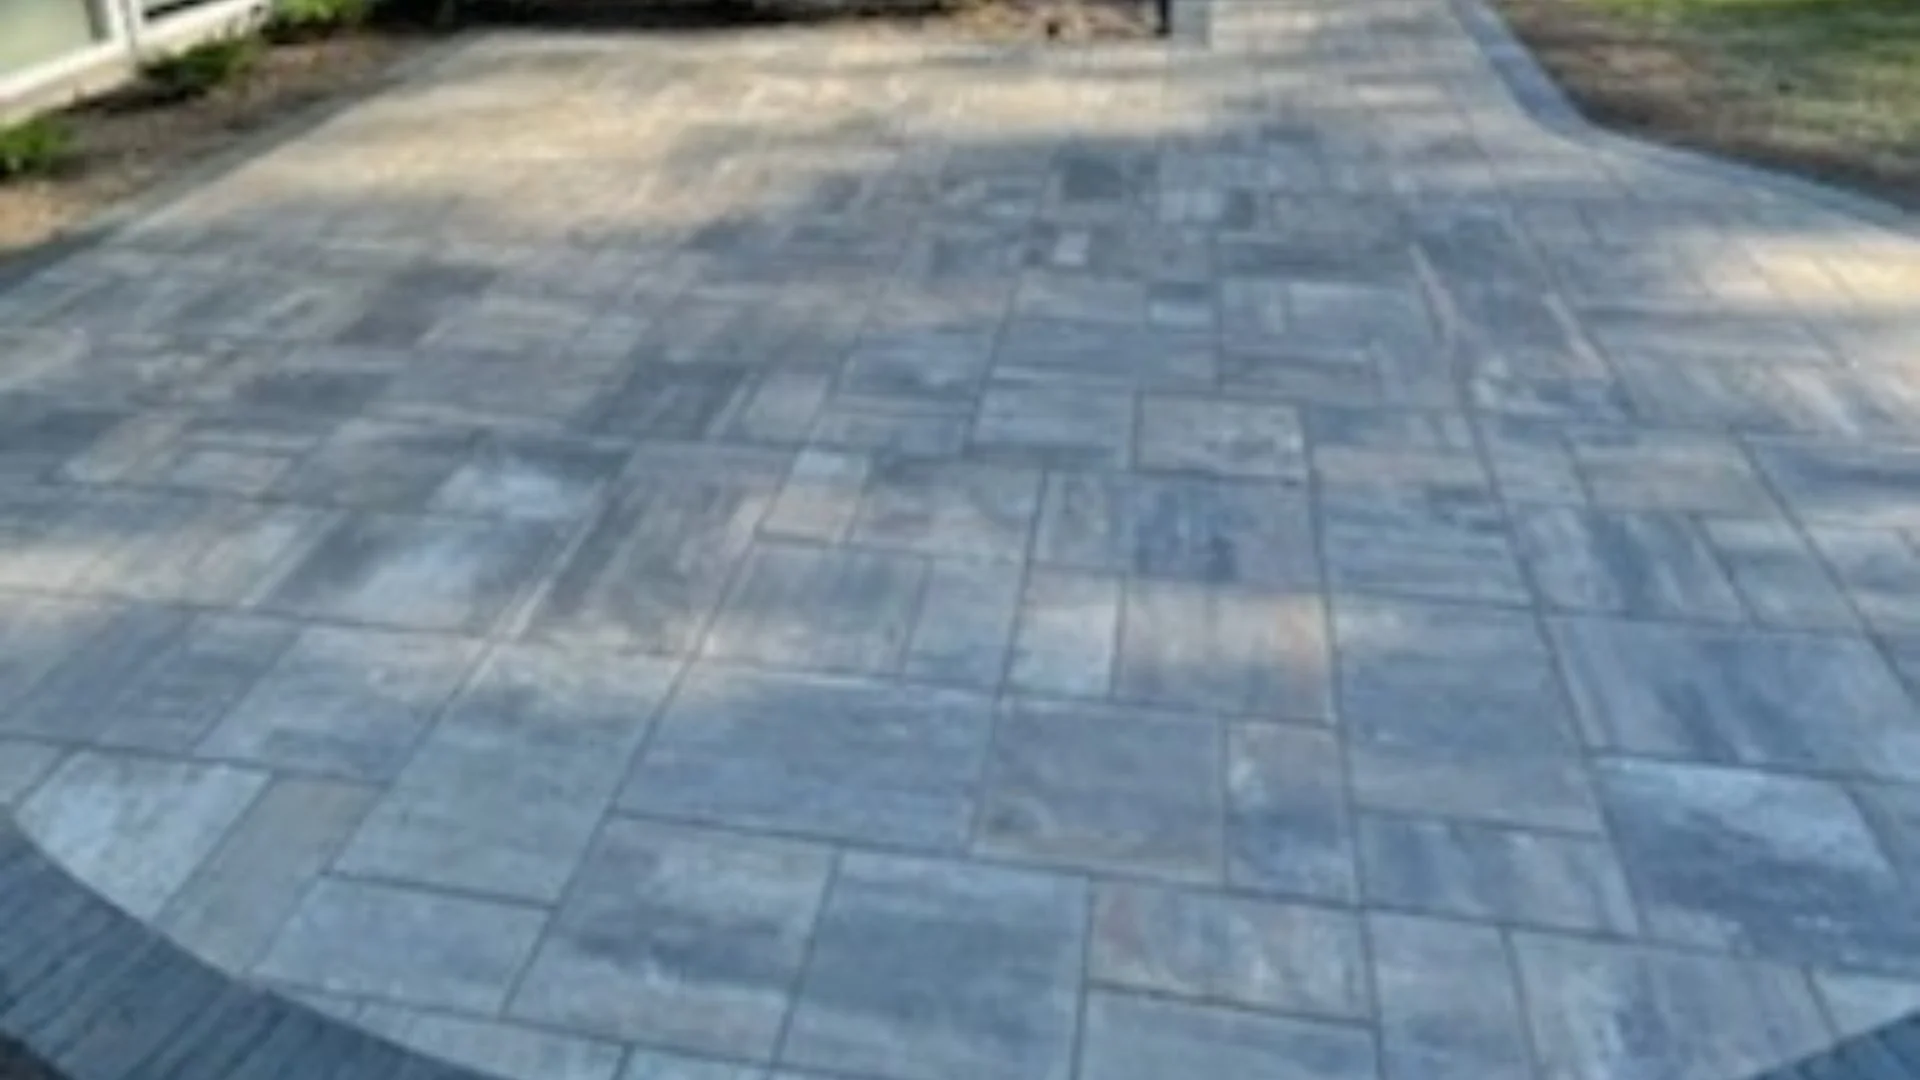 Are Pavers a Good Material Choice to Use When Constructing a Patio?